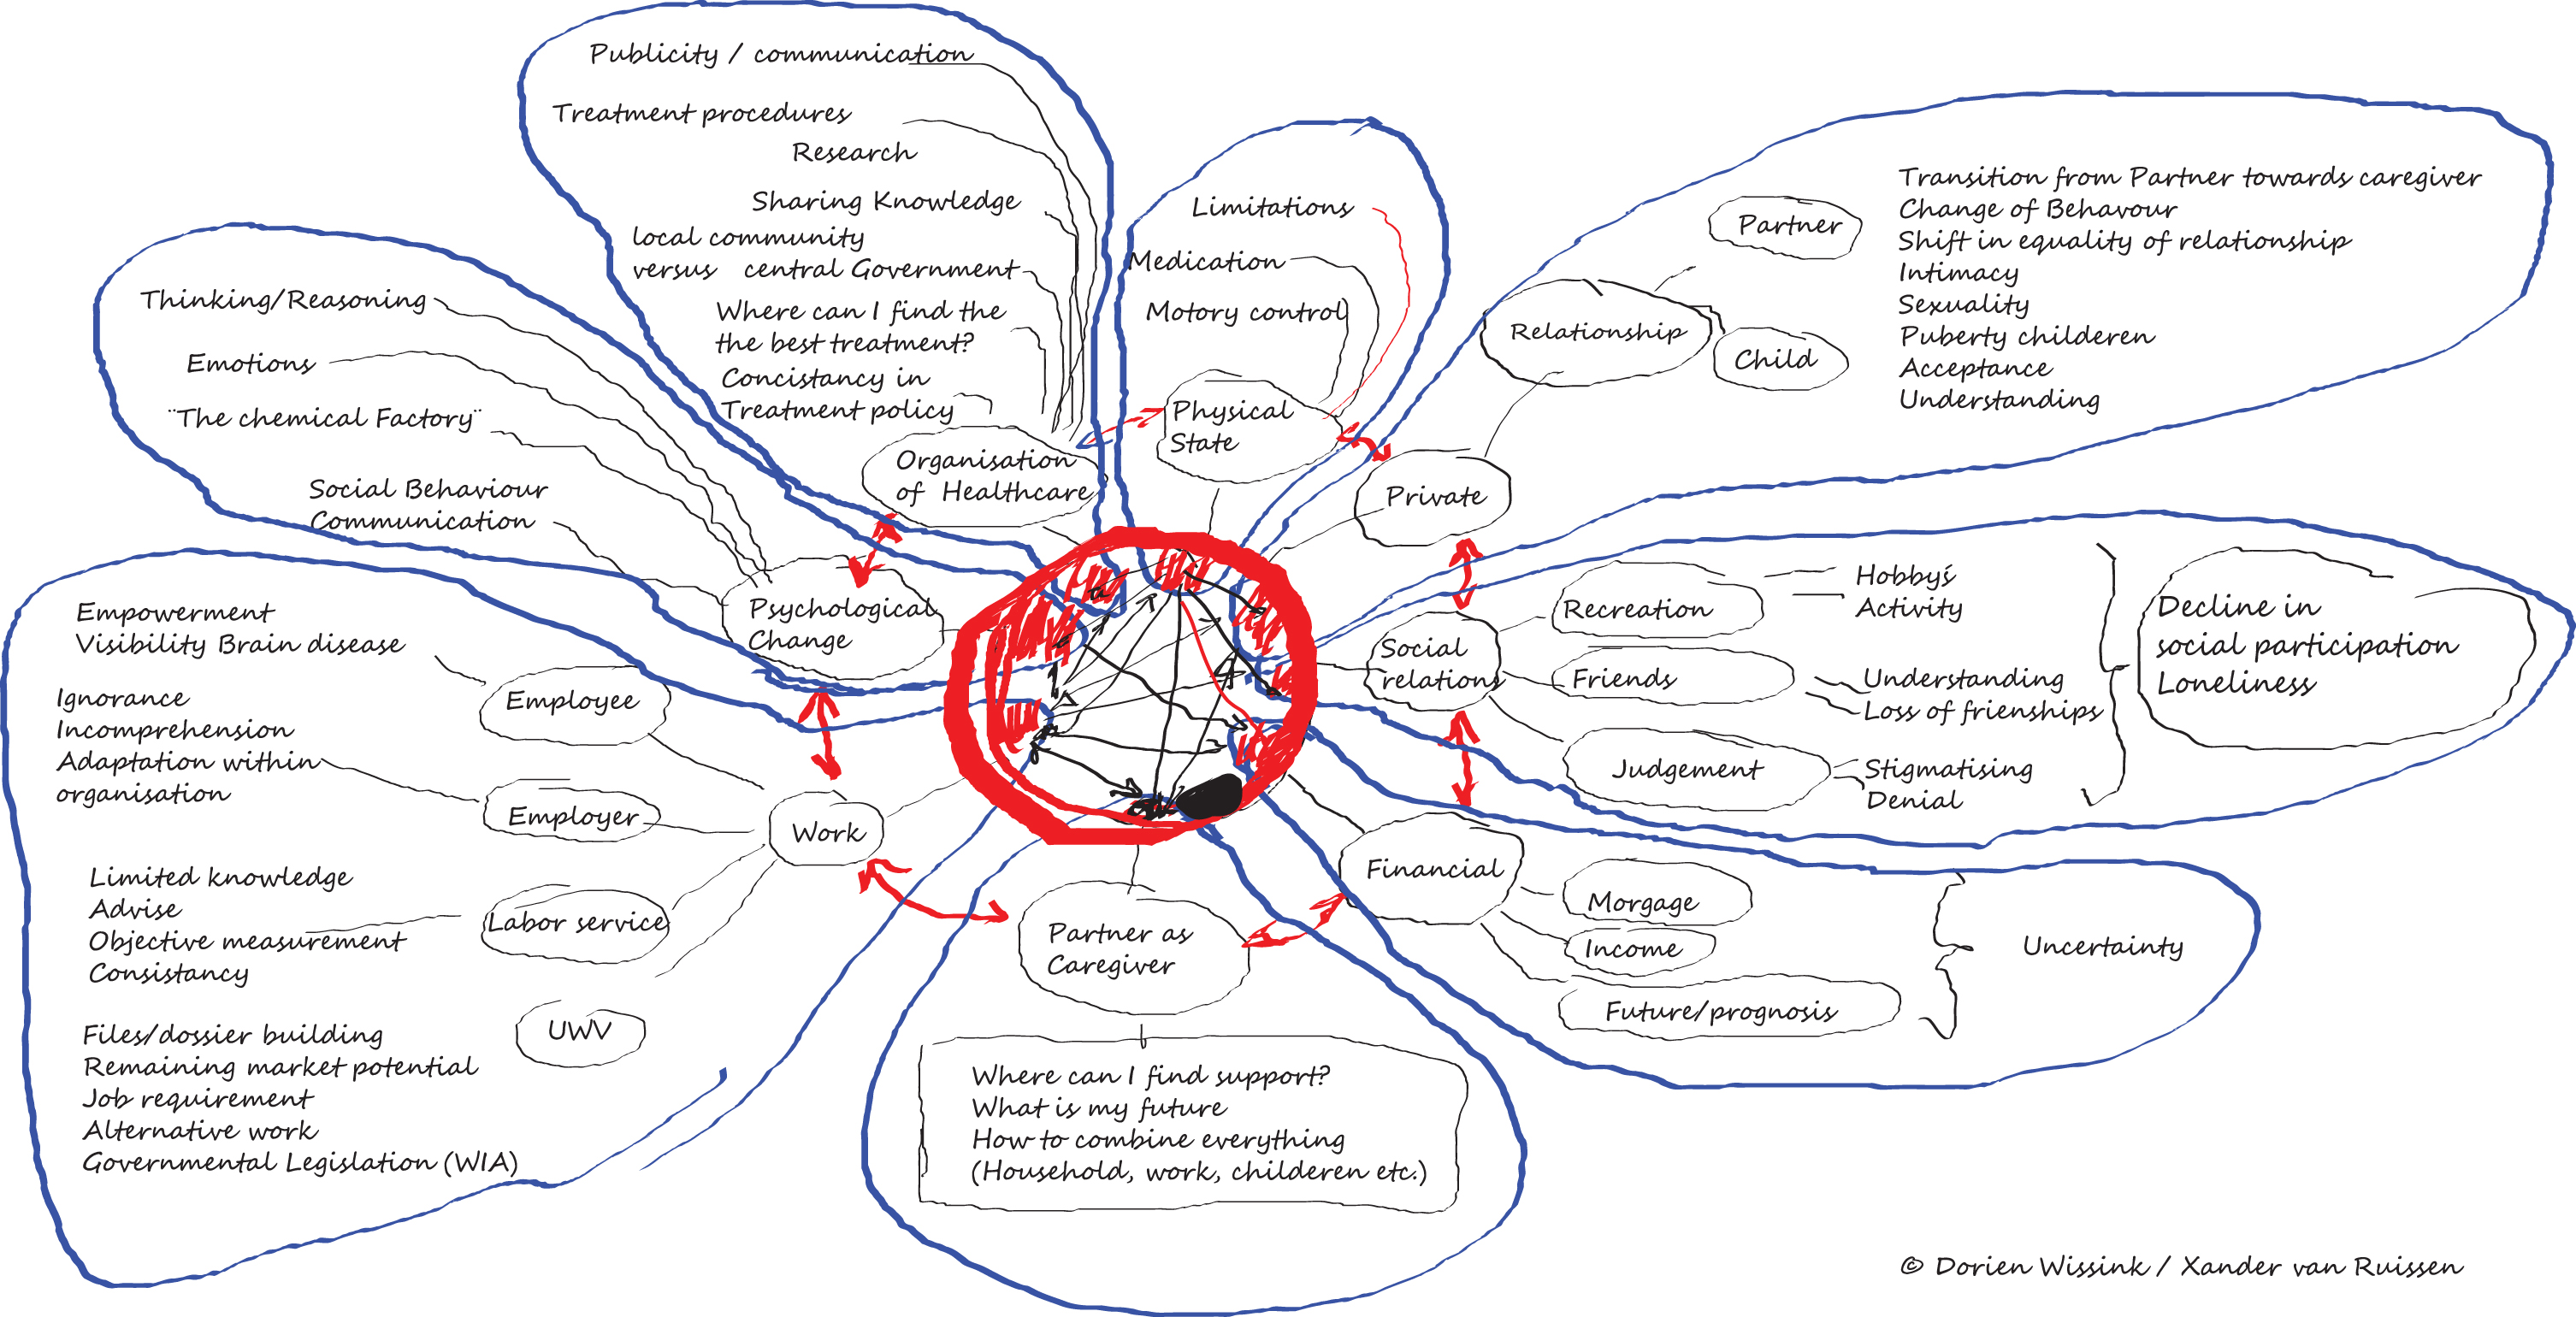 Mindmap visualizing the challenges faced by a young onset Parkinson’s disease patient. This mindmap displays the clinical aspects, circumstances, societal engagements and complexity of the young onset Parkinson’s disease patient. It helps to facilitate person-centred care based on the individual needs of the person living with Parkinson’s disease on a young age. This mindmap is created by Xander van Ruissen (YOPD patient and co-author of this paper) and his wife Dorien Wissink.